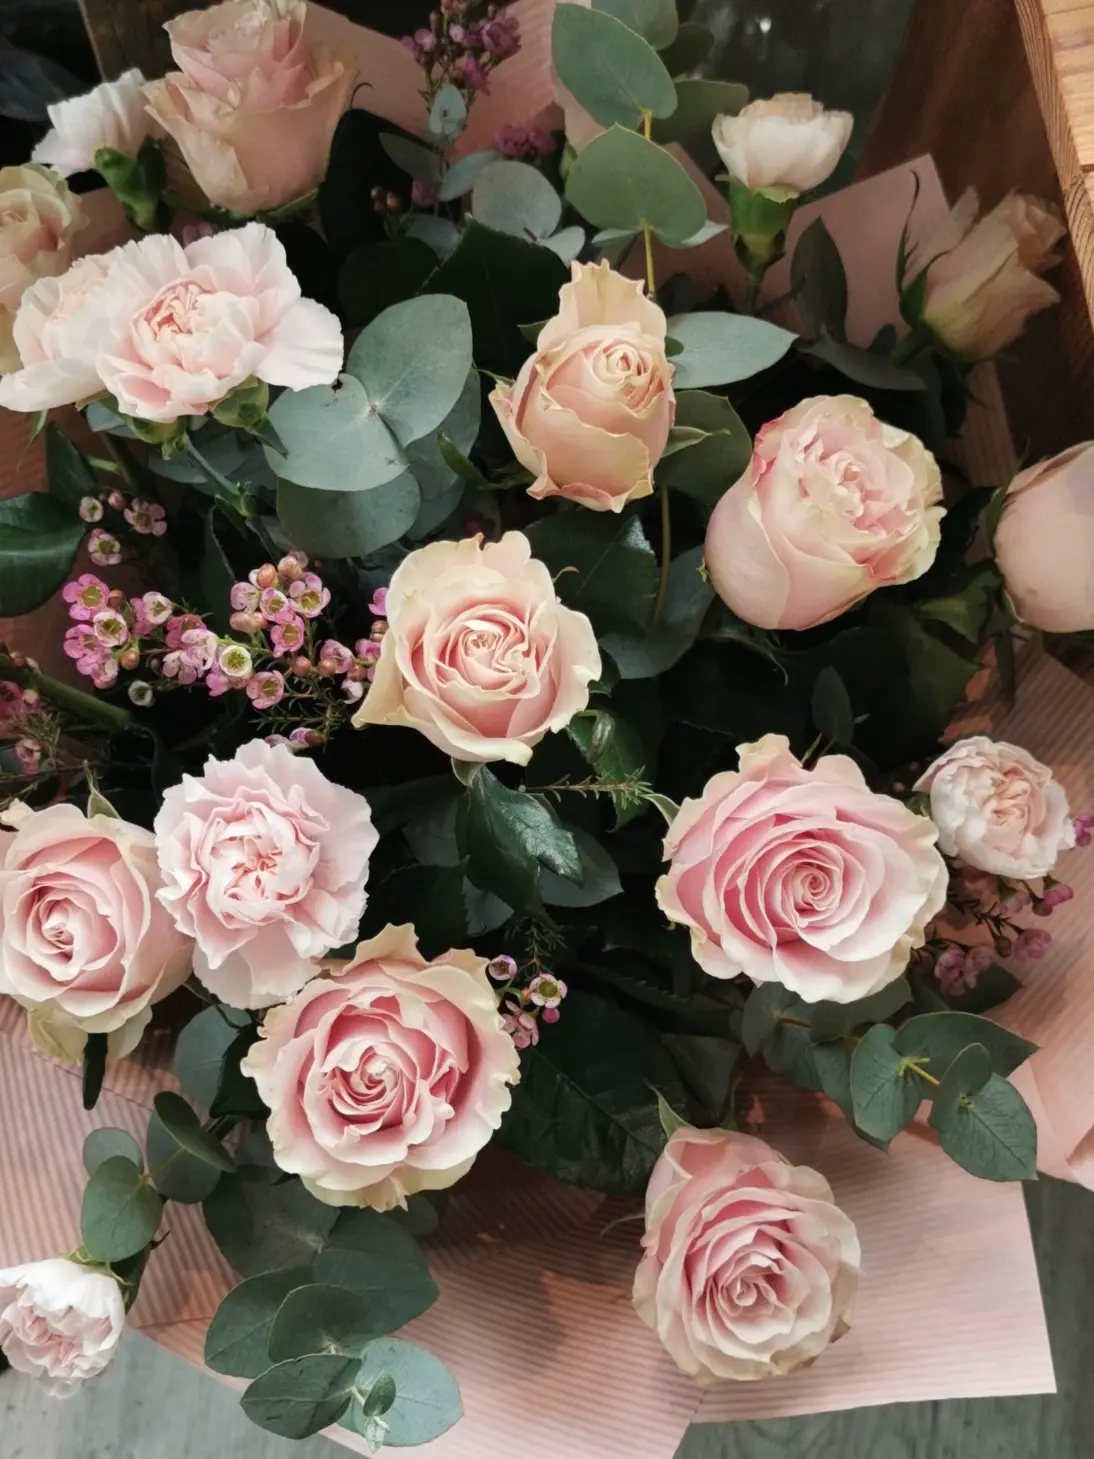 The rose bouquet is an elegant and romantic flower arrangement in a classic and delicate way.